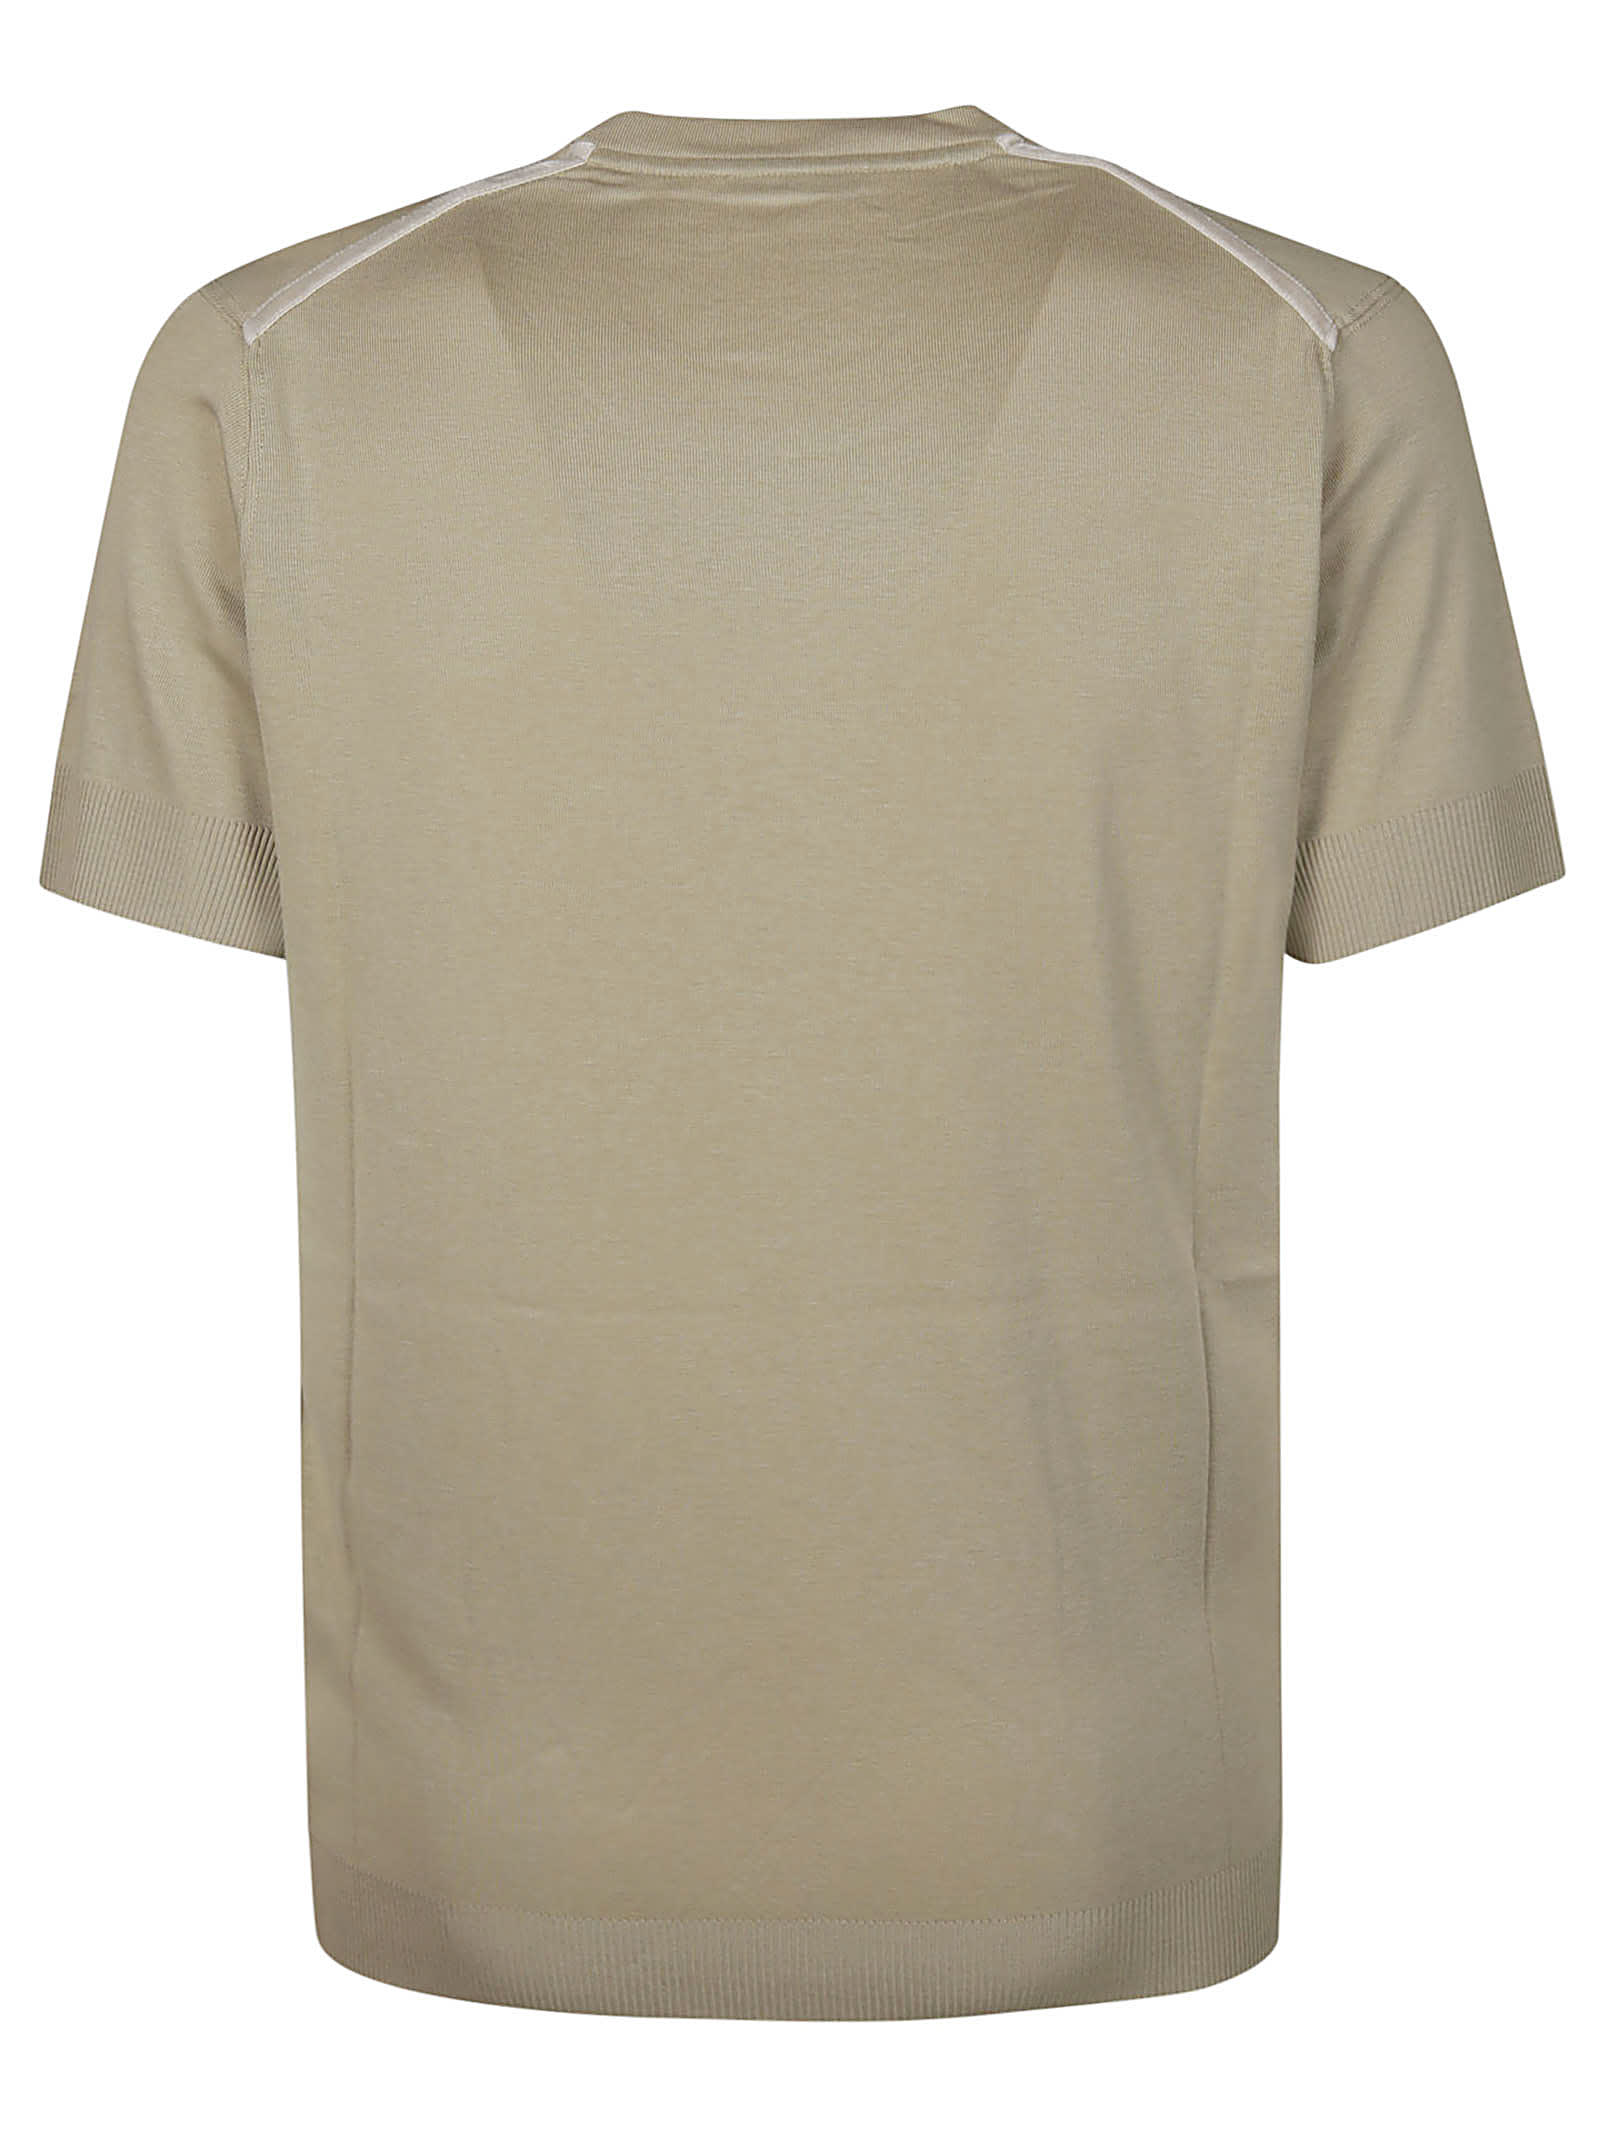 Shop Tom Ford Placed Rib T-shirt In Pale Olive